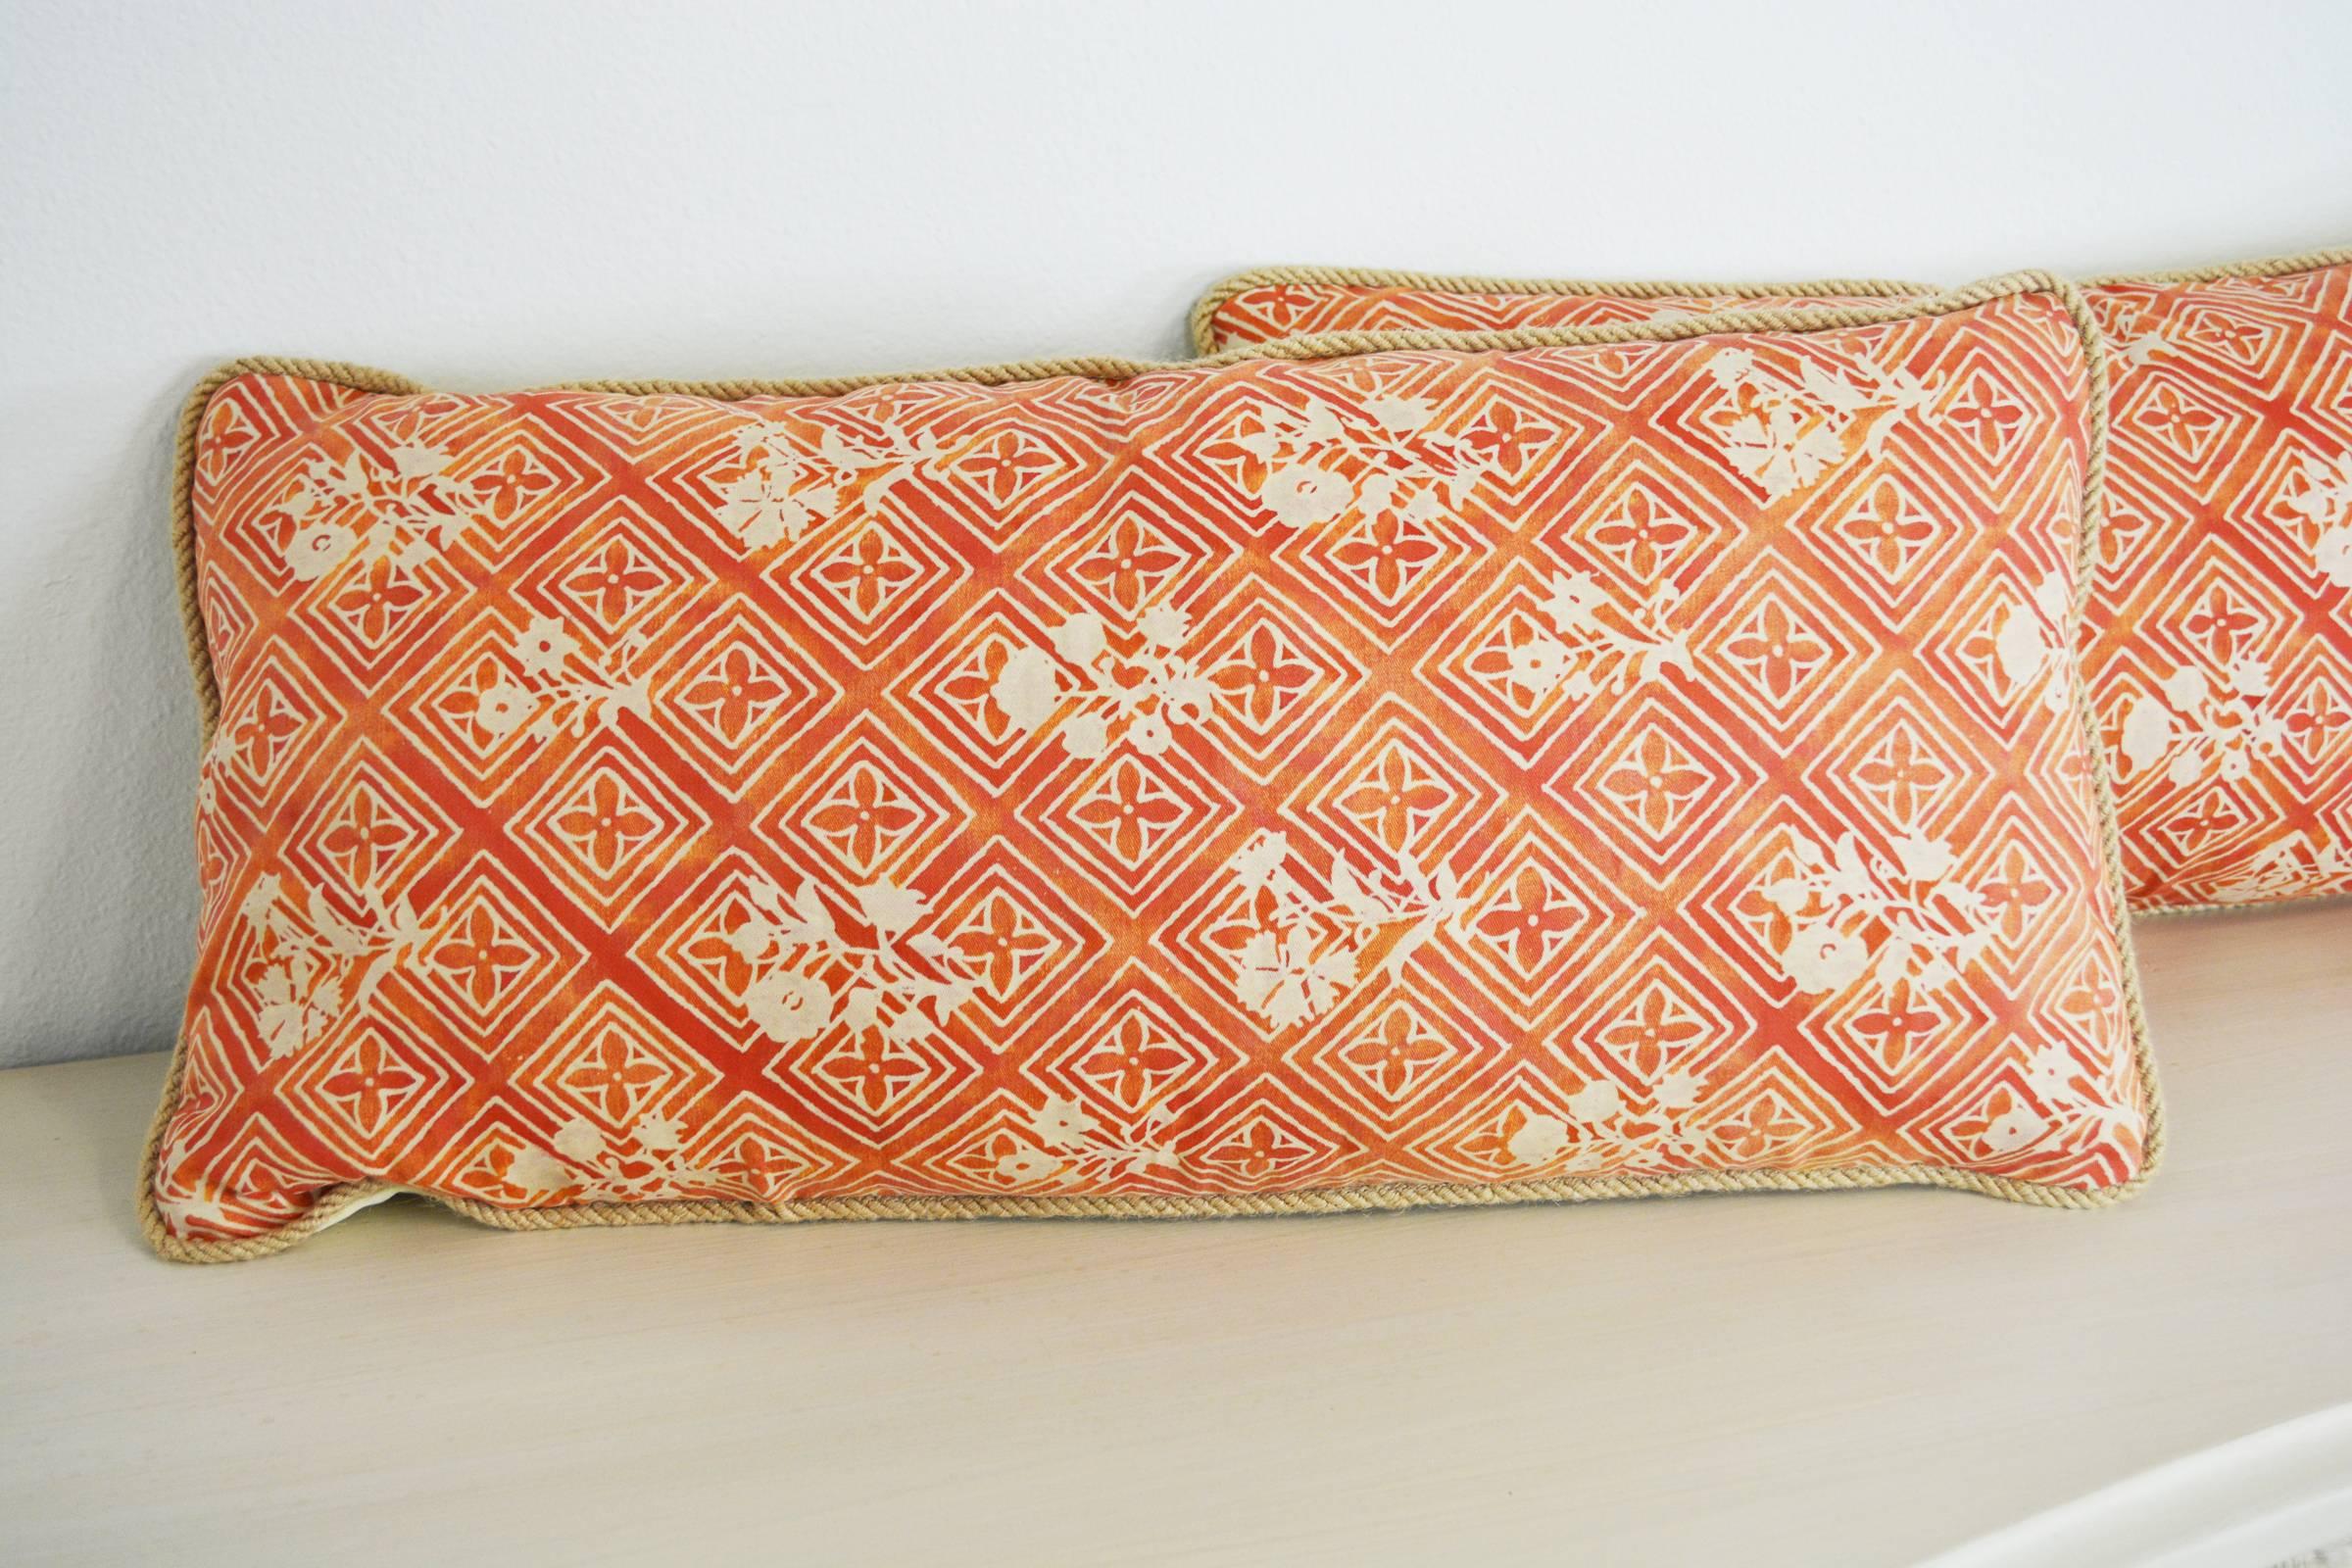 A pair of pillows newly made from vintage Fortuny 